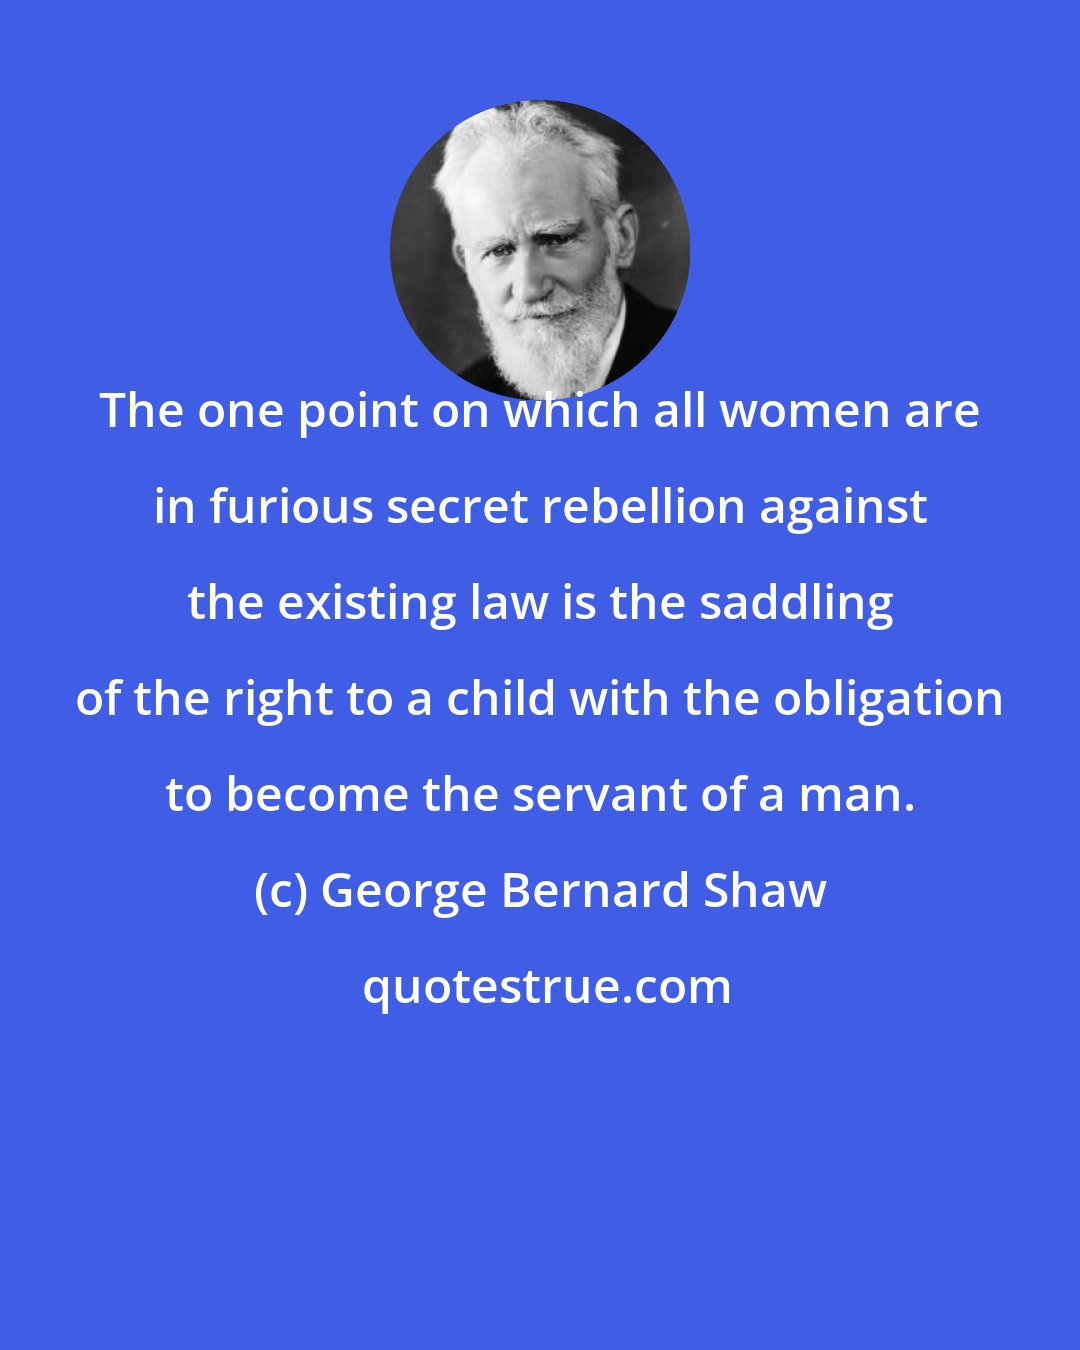 George Bernard Shaw: The one point on which all women are in furious secret rebellion against the existing law is the saddling of the right to a child with the obligation to become the servant of a man.